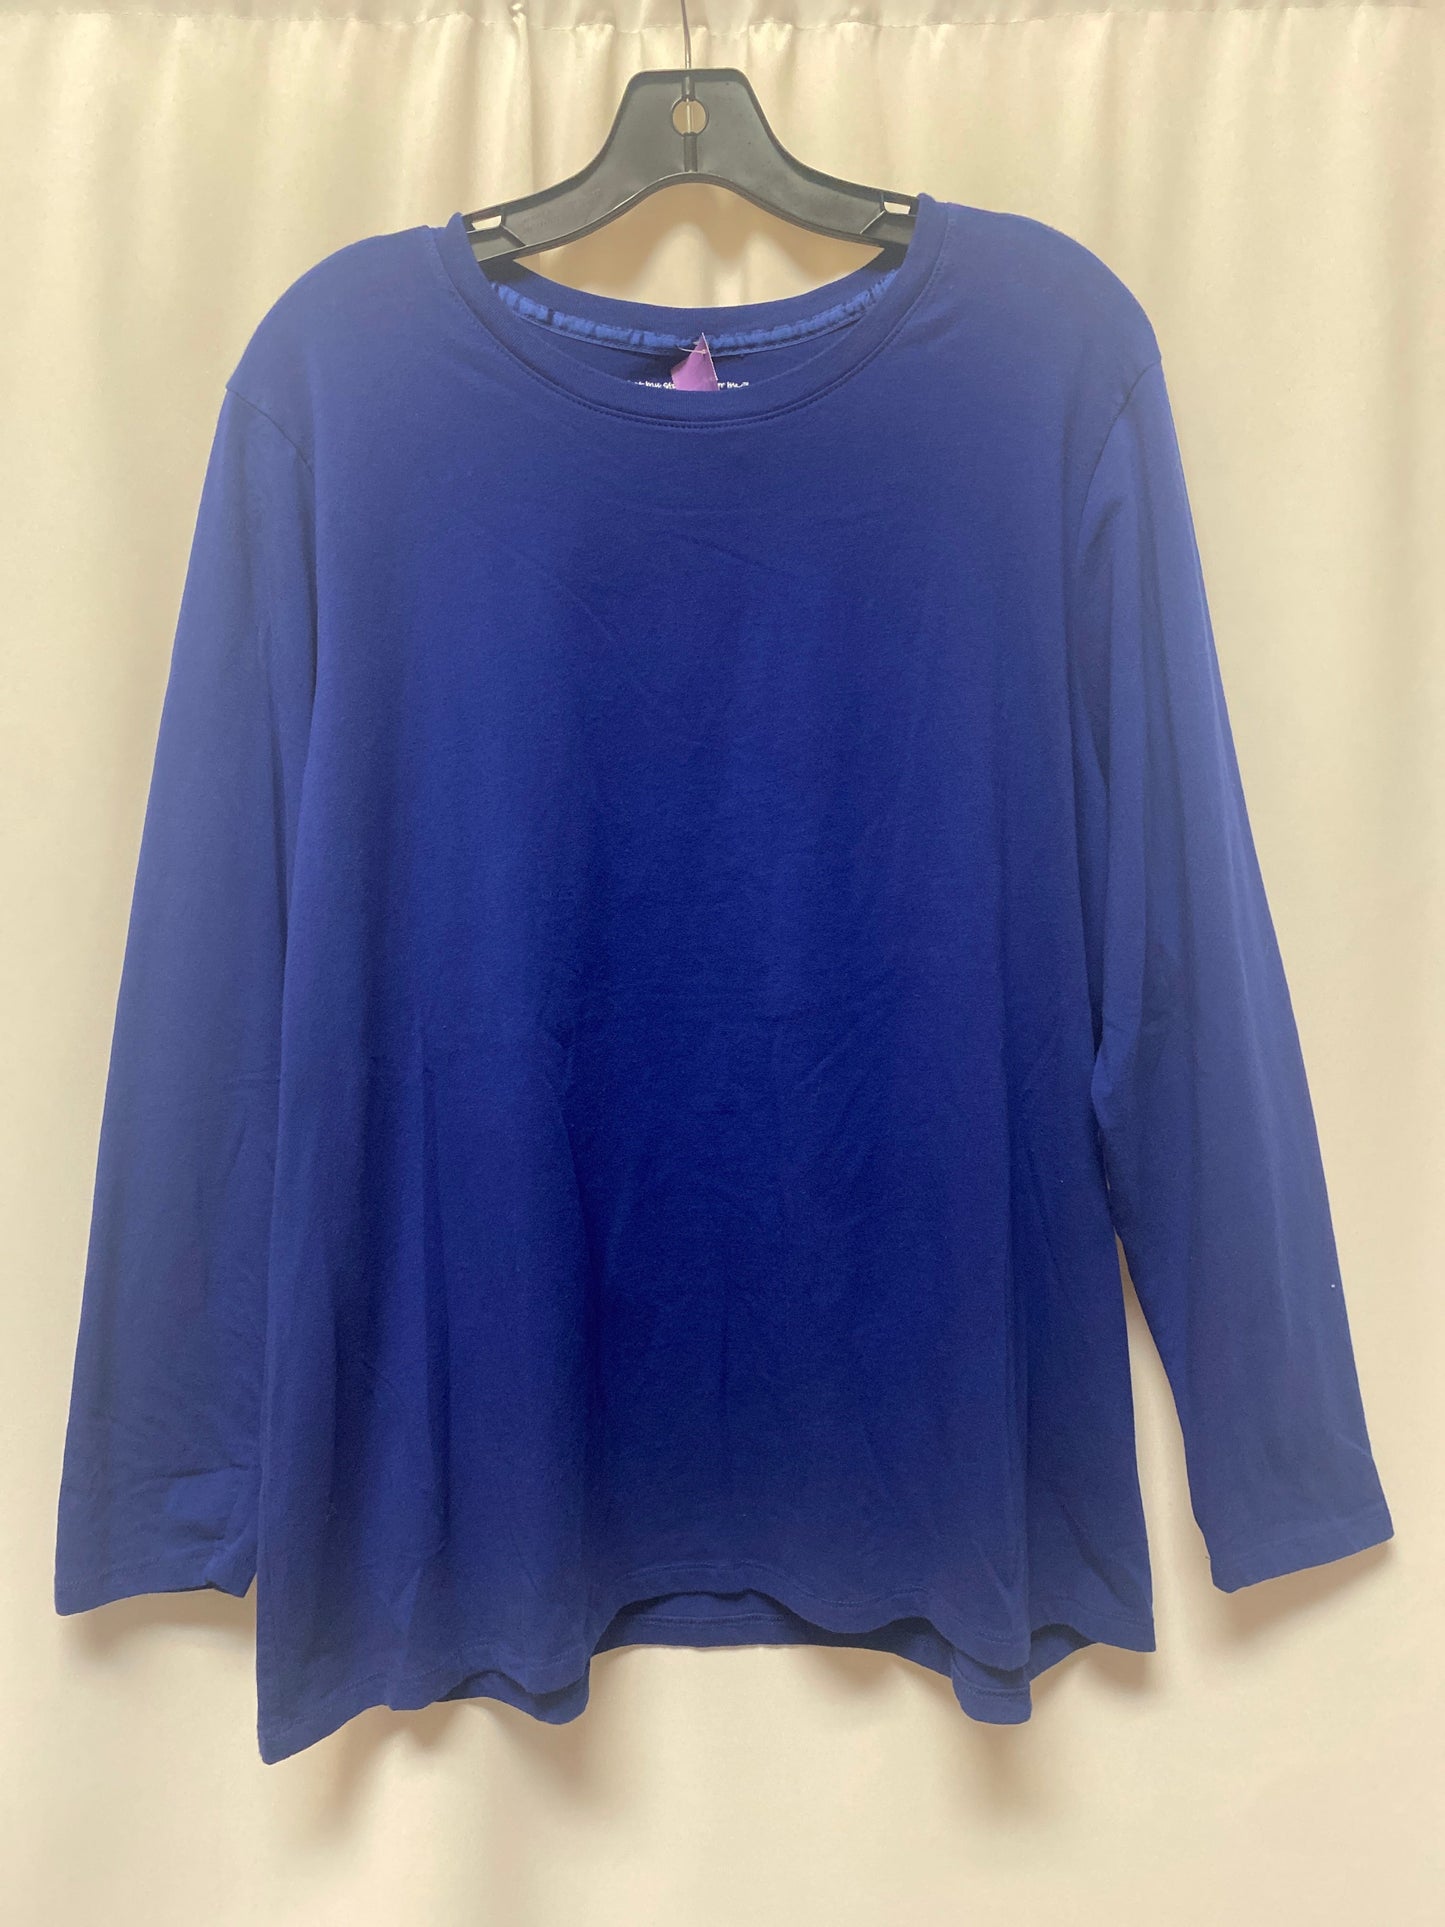 Blue Top Long Sleeve Just My Size, Size 3x